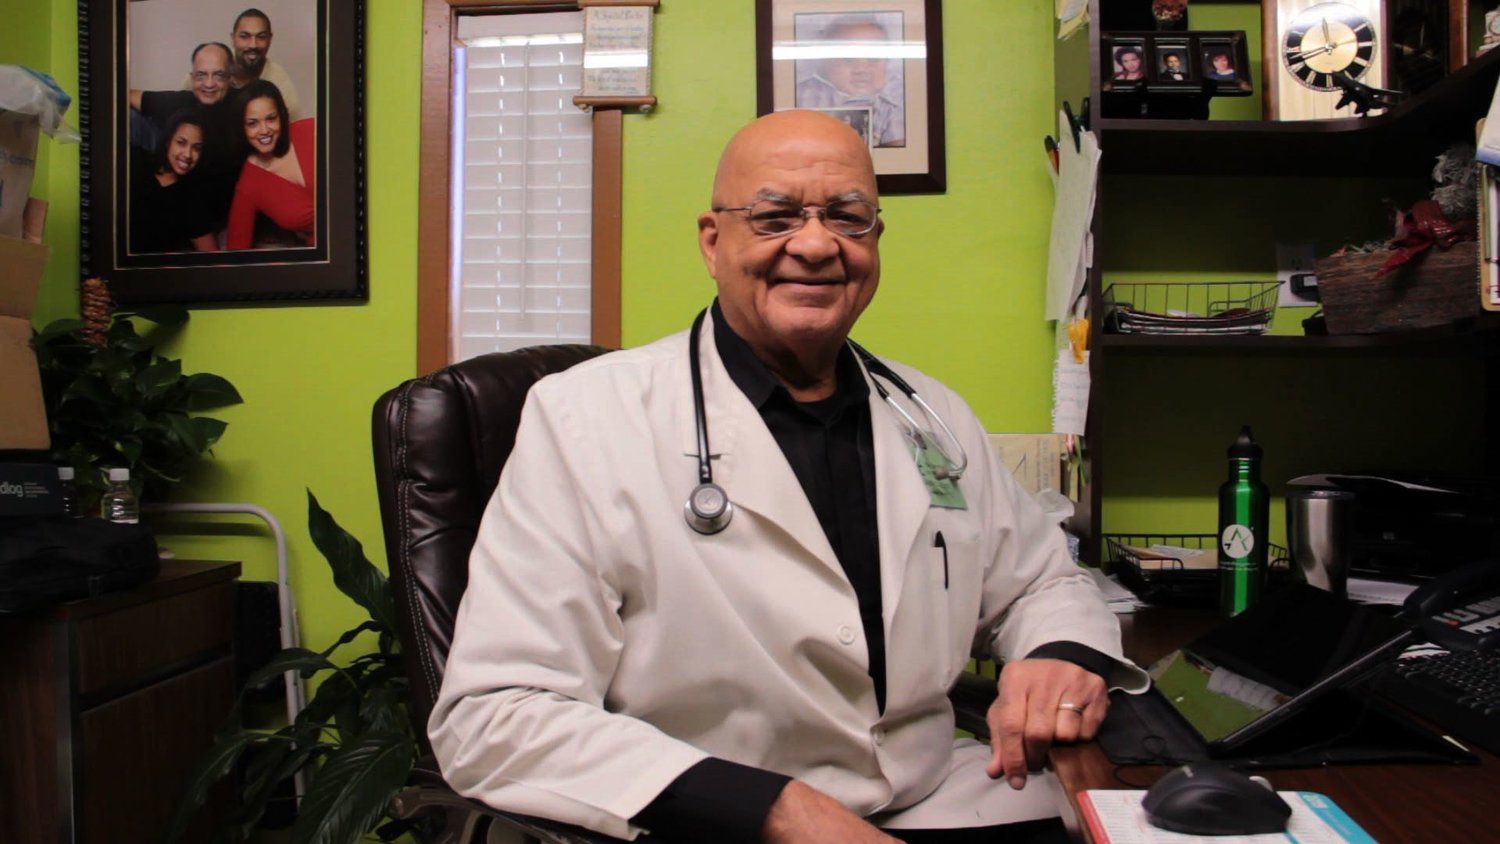 CUTLINE: Dr. Garth O. Vaz takes a break in his busy, down-home office to chat about some of the exciting things going on in his clinic.